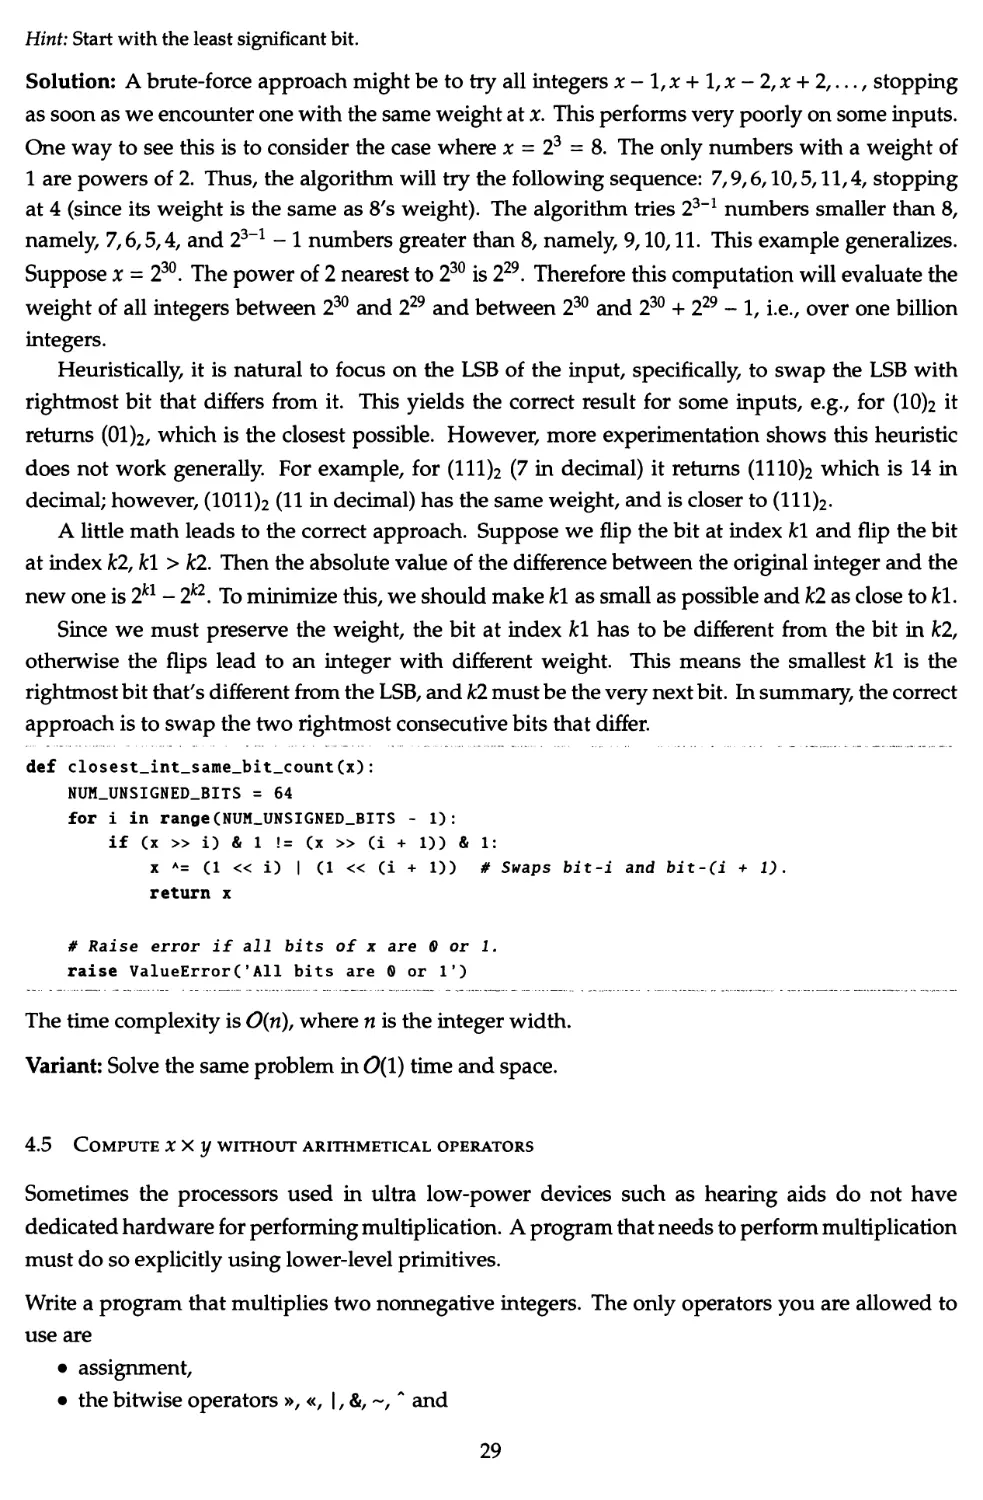 5.2 Increment an arbitrary-precision integer
5.3 Multiply two arbitrary-precision integers